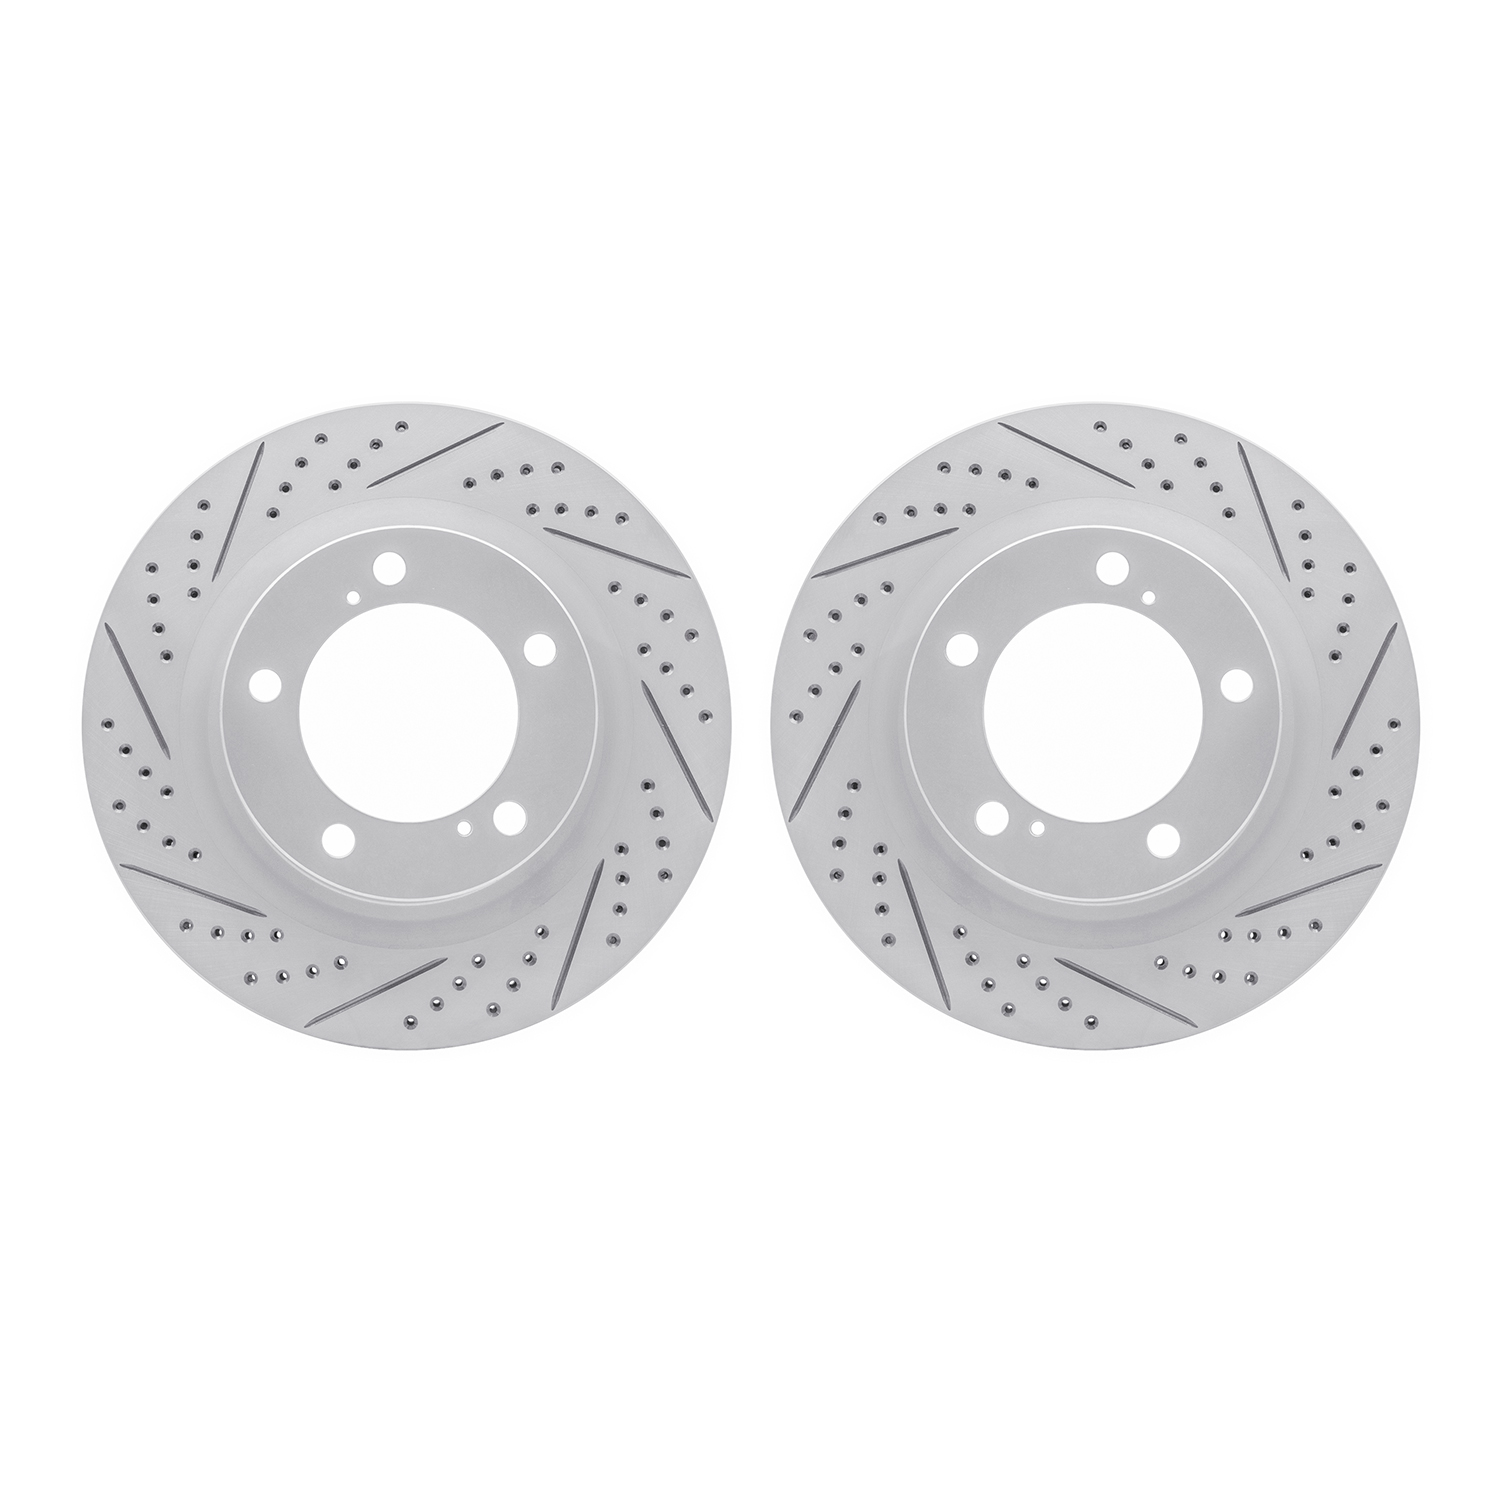 2002-76012 Geoperformance Drilled/Slotted Brake Rotors, Fits Select Lexus/Toyota/Scion, Position: Front